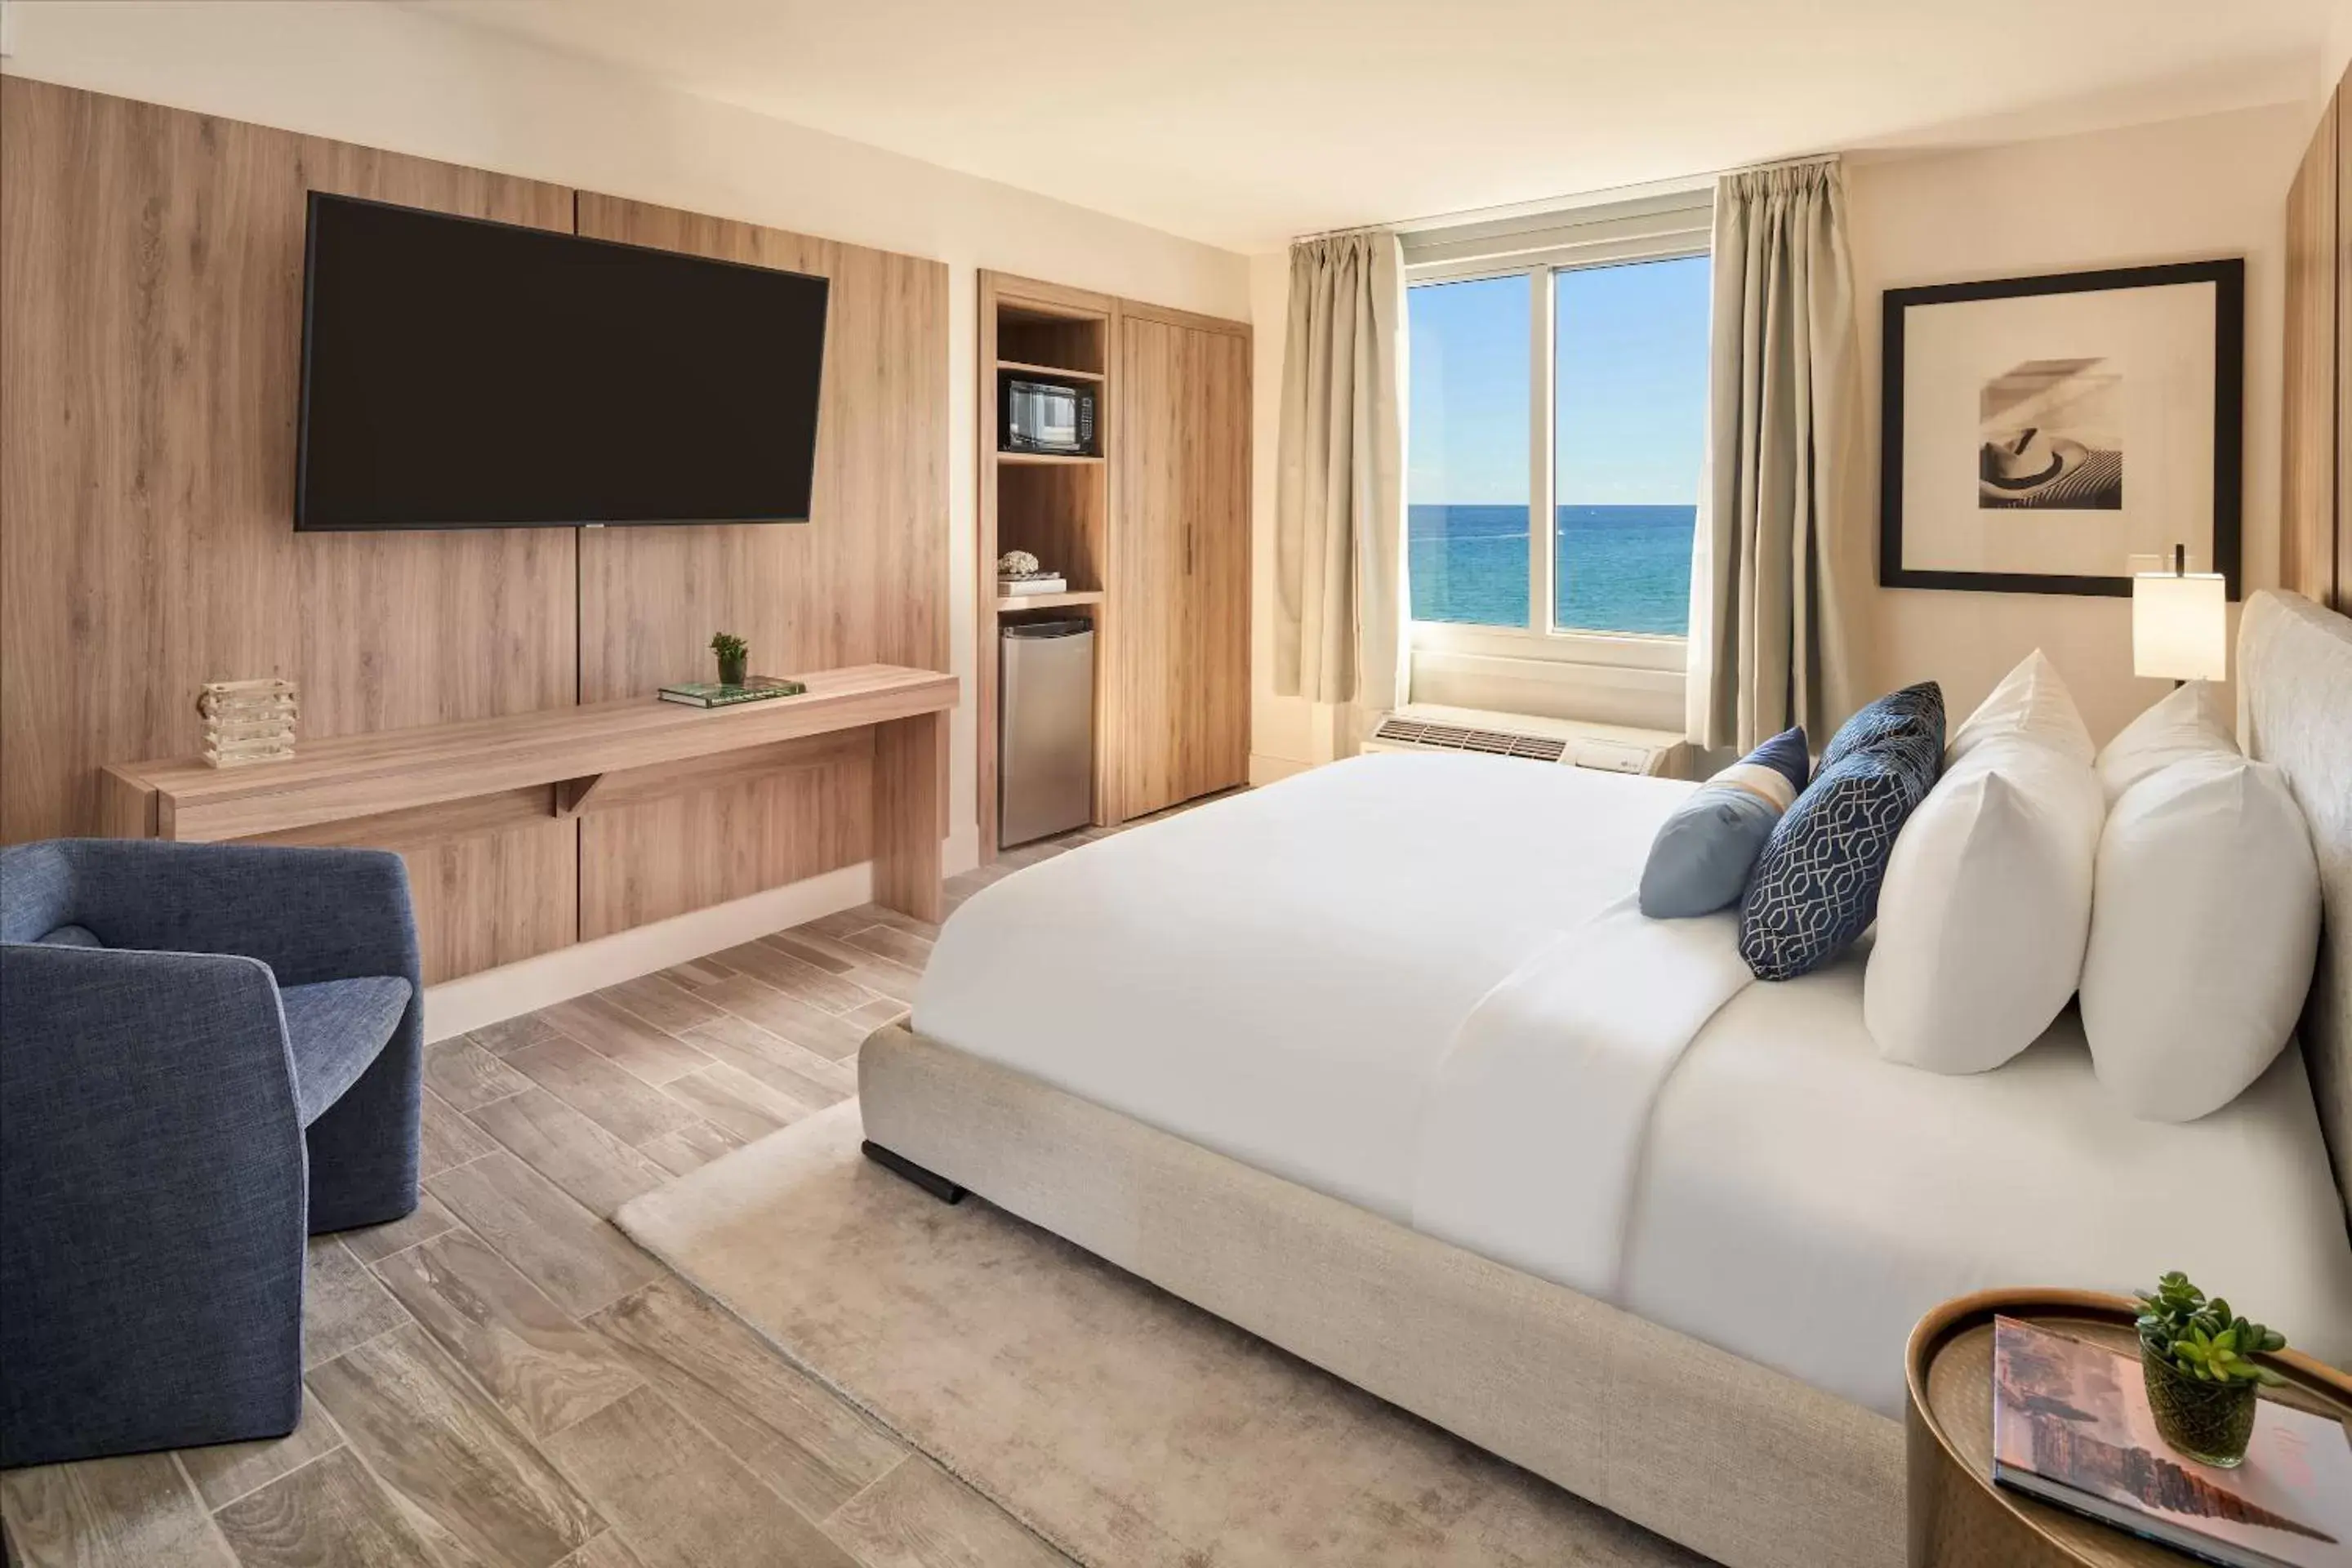 King Suite with Sea View in Hillsboro Beach Resort